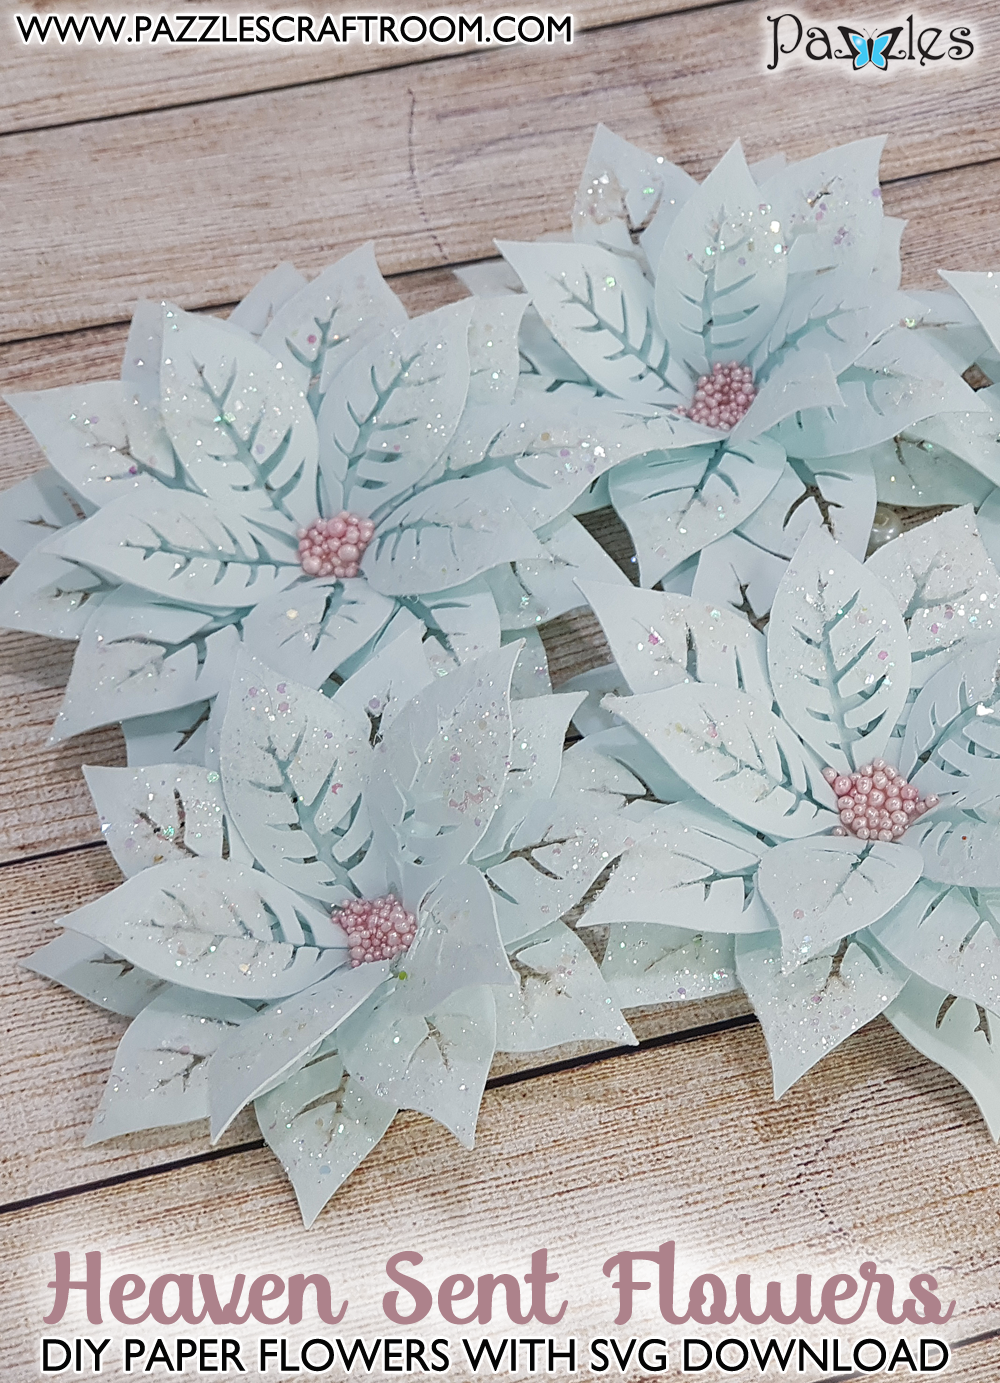 Pazzles DIY Heaven Sent Paper Flowers with instant SVG download. Instant SVG download compatible with all major electronic cutters including Pazzles Inspiration, Cricut, and Silhouette Cameo. Design by Nida Tanweer.